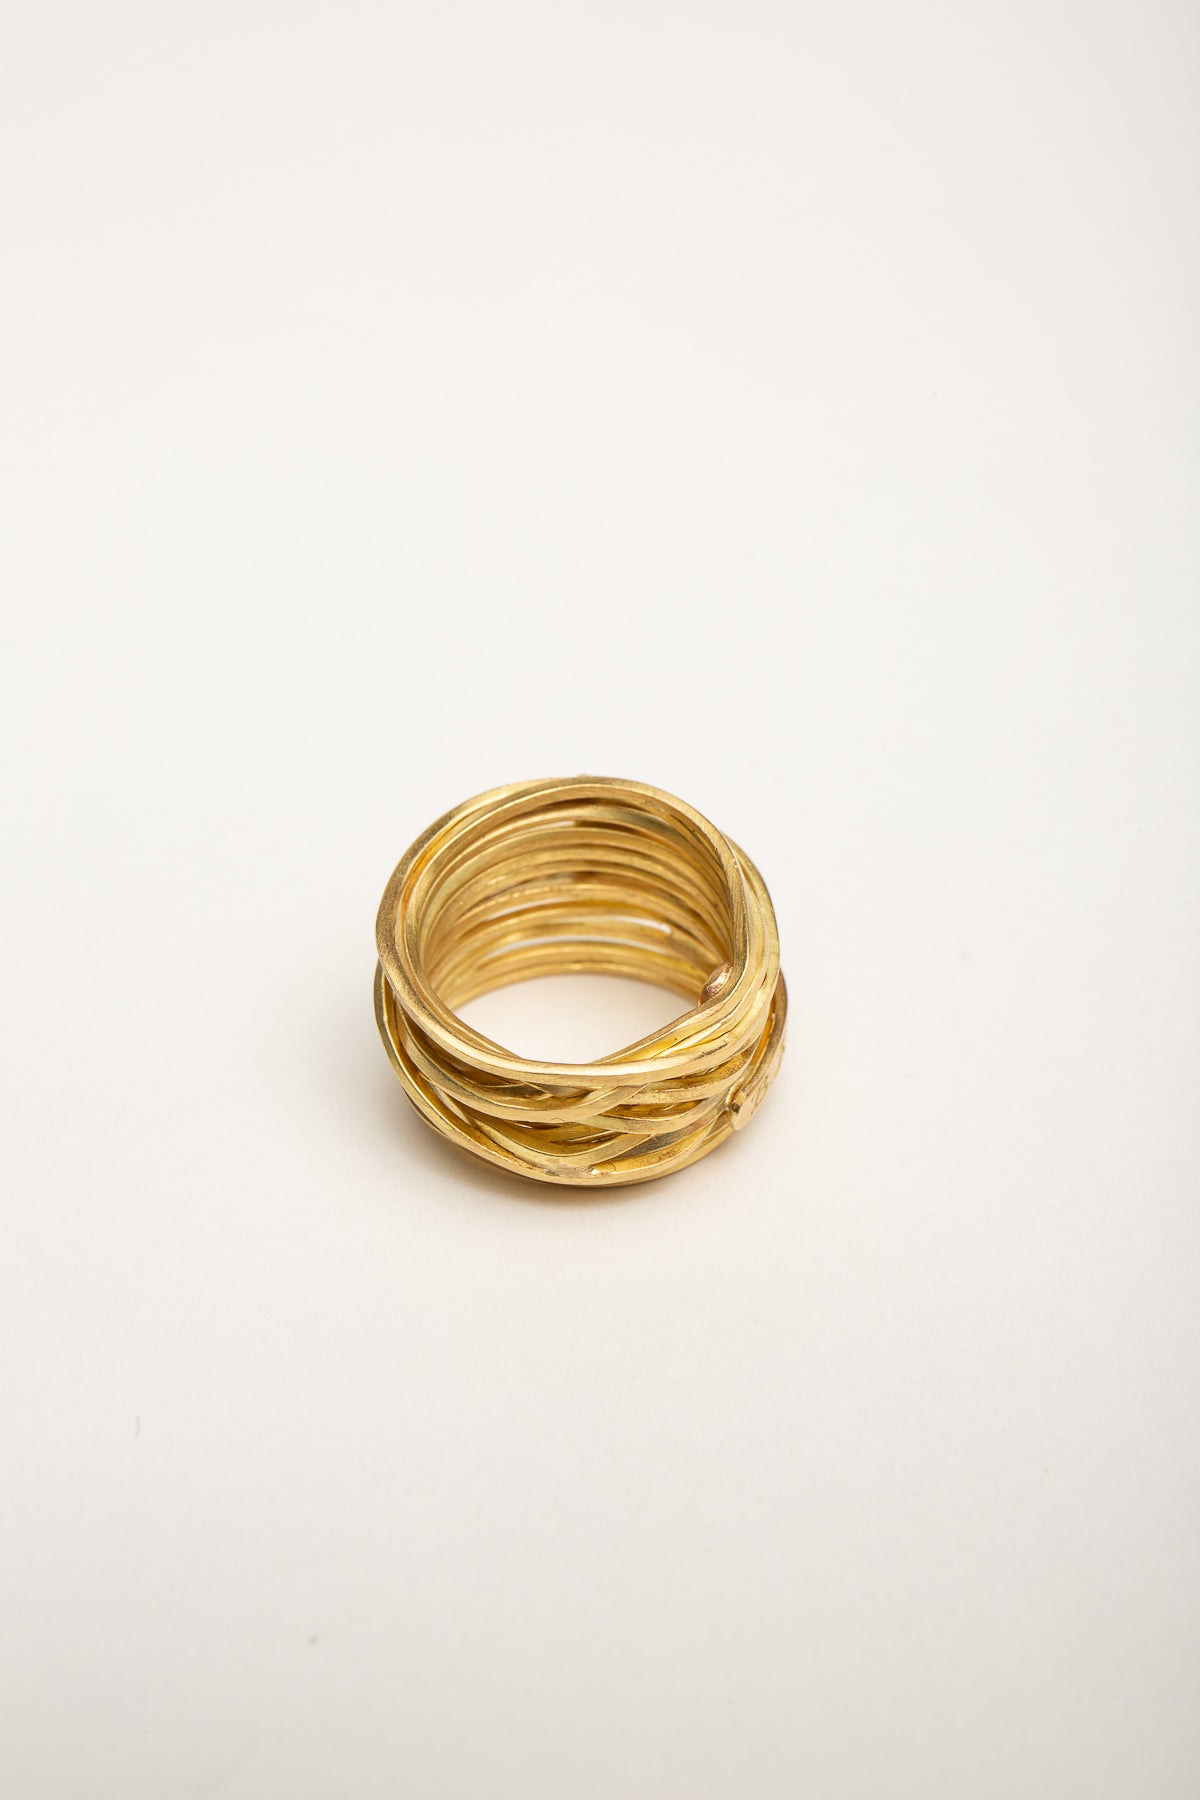 BOAZ KASHI | 18K GOLD STACKED WIRE RING